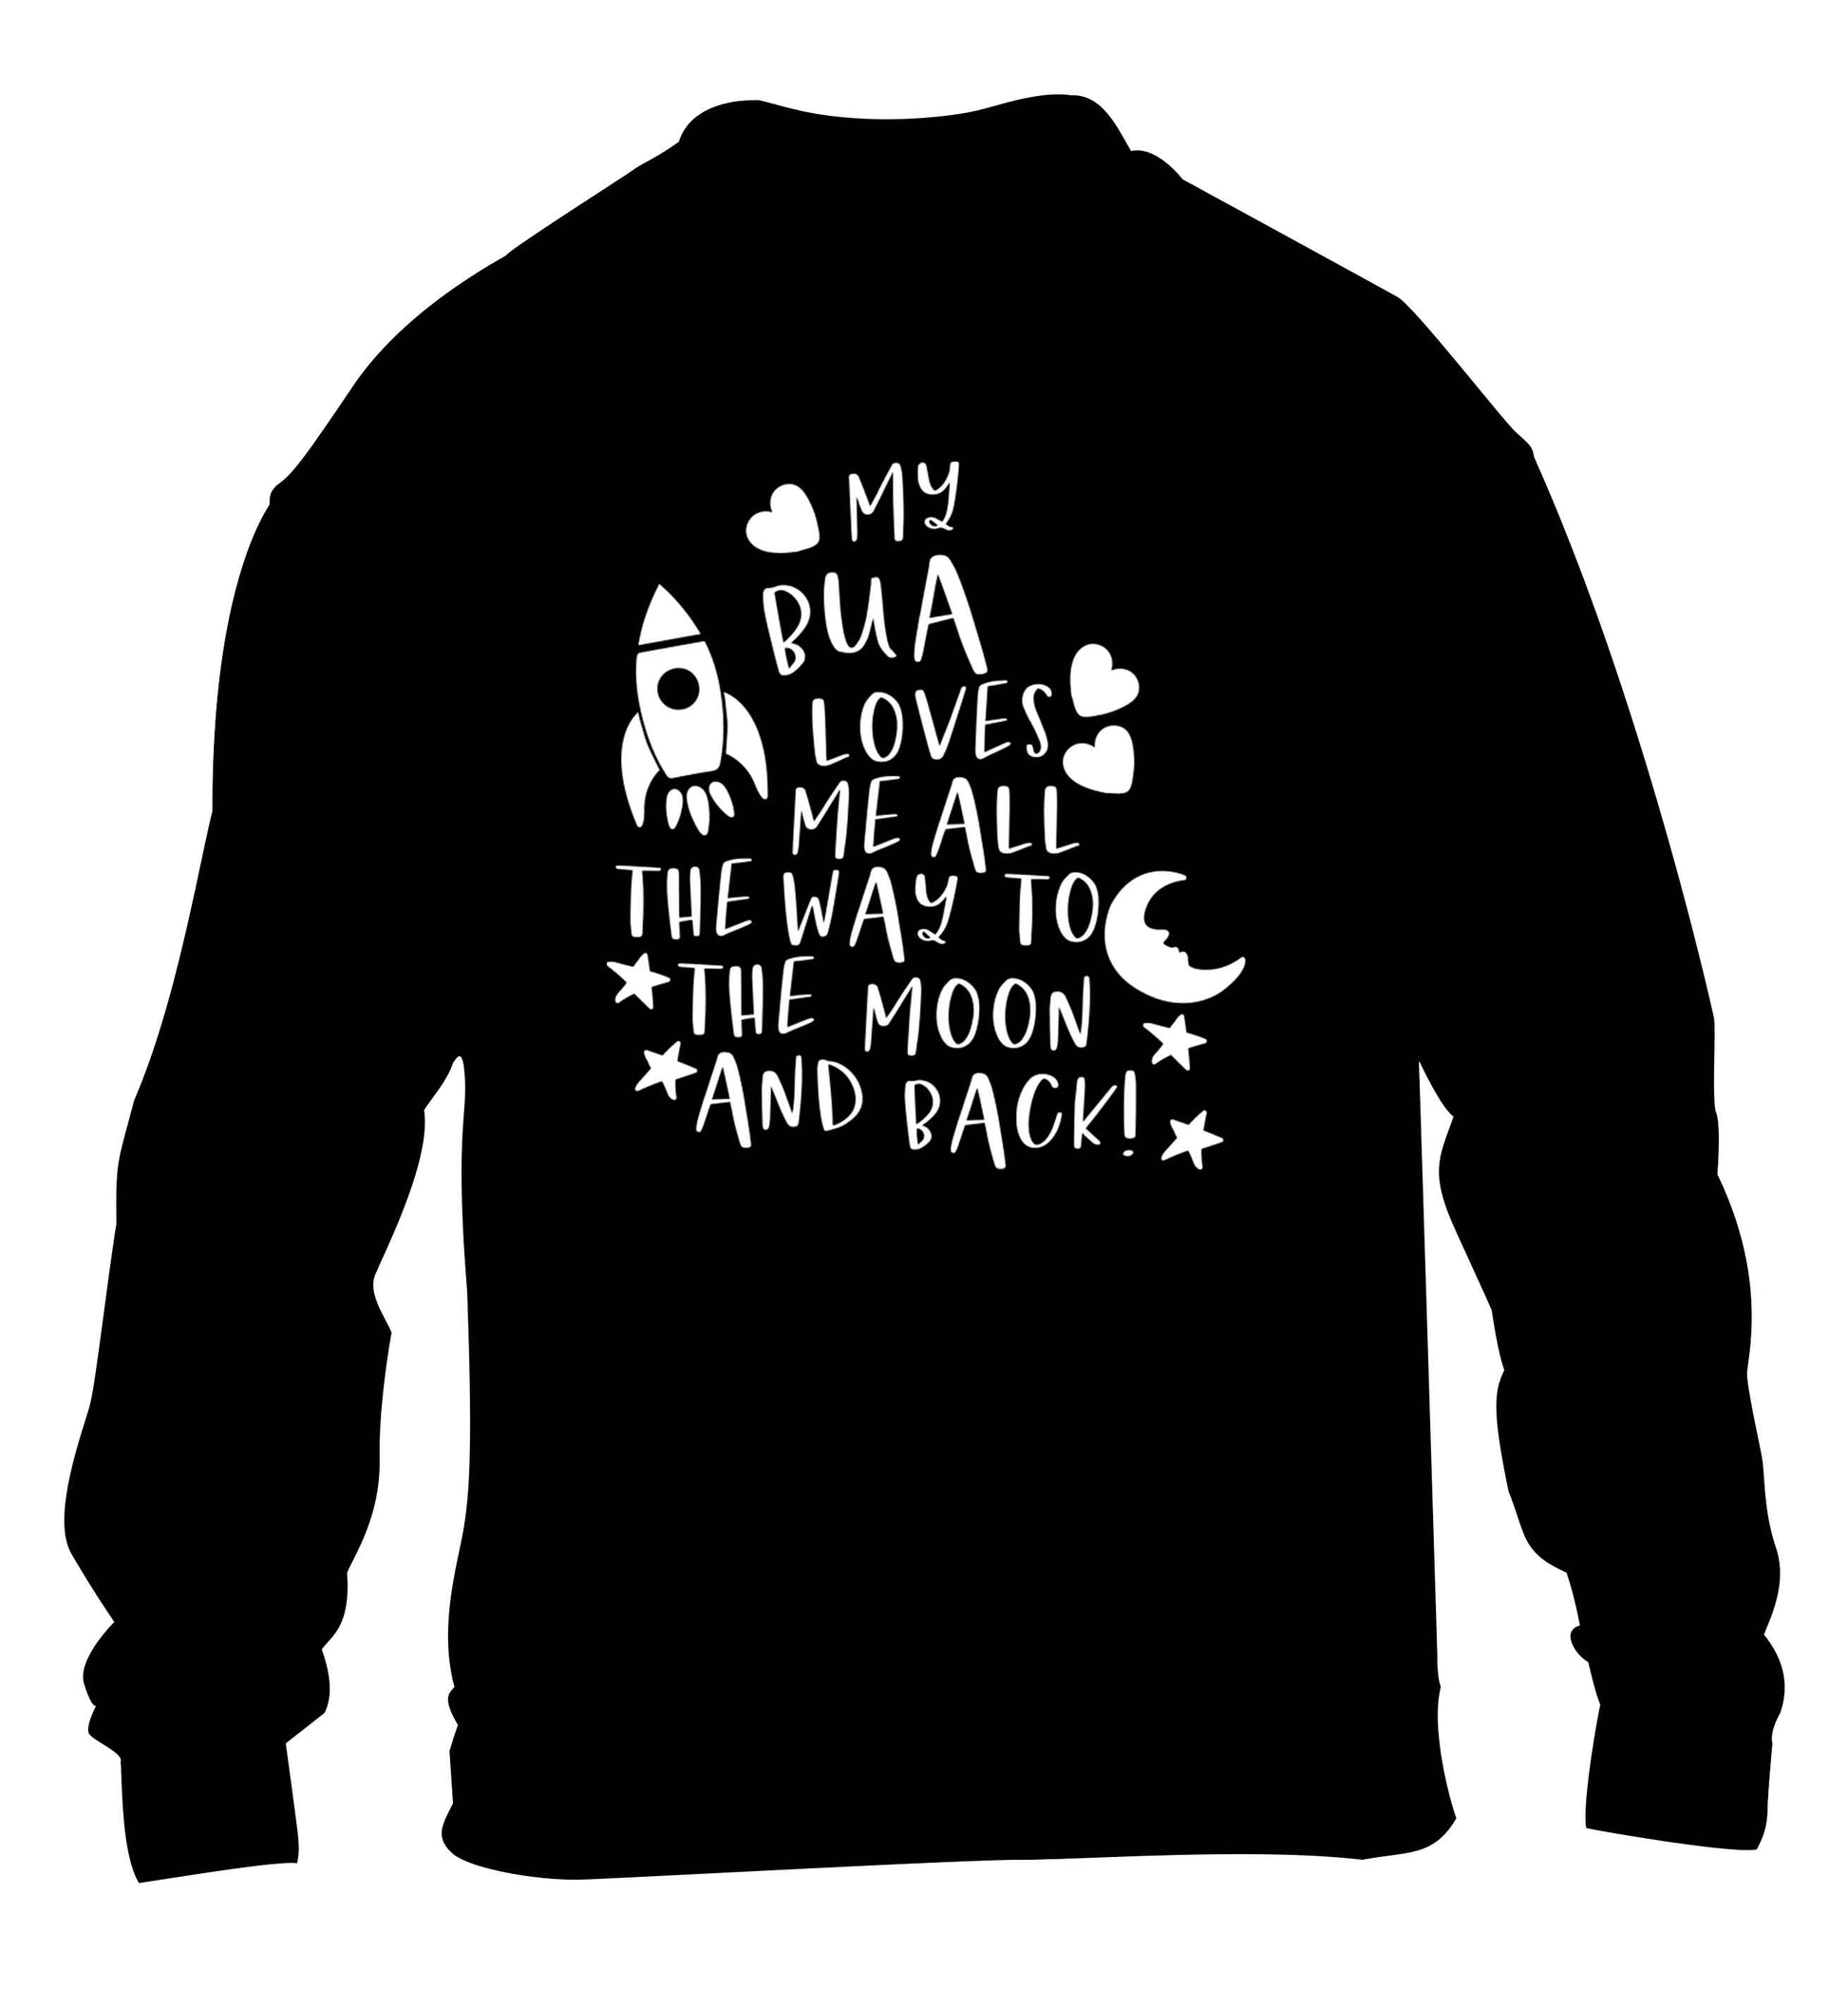 My bua loves me all they way to the moon and back children's black sweater 12-13 Years